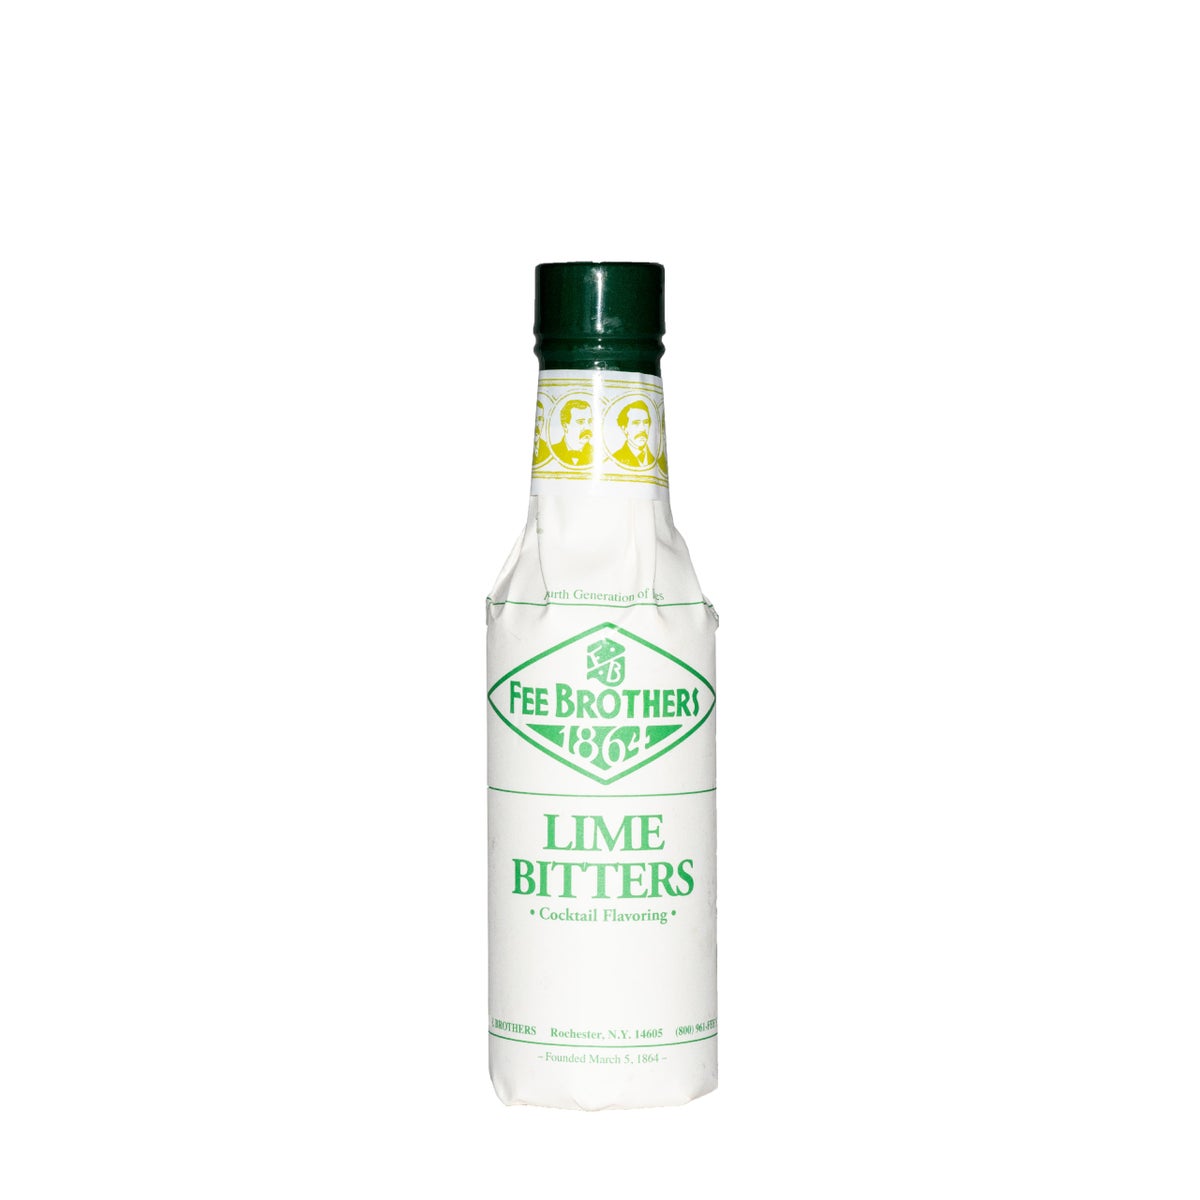 FEE BROTHERS - BITTERS - LIME